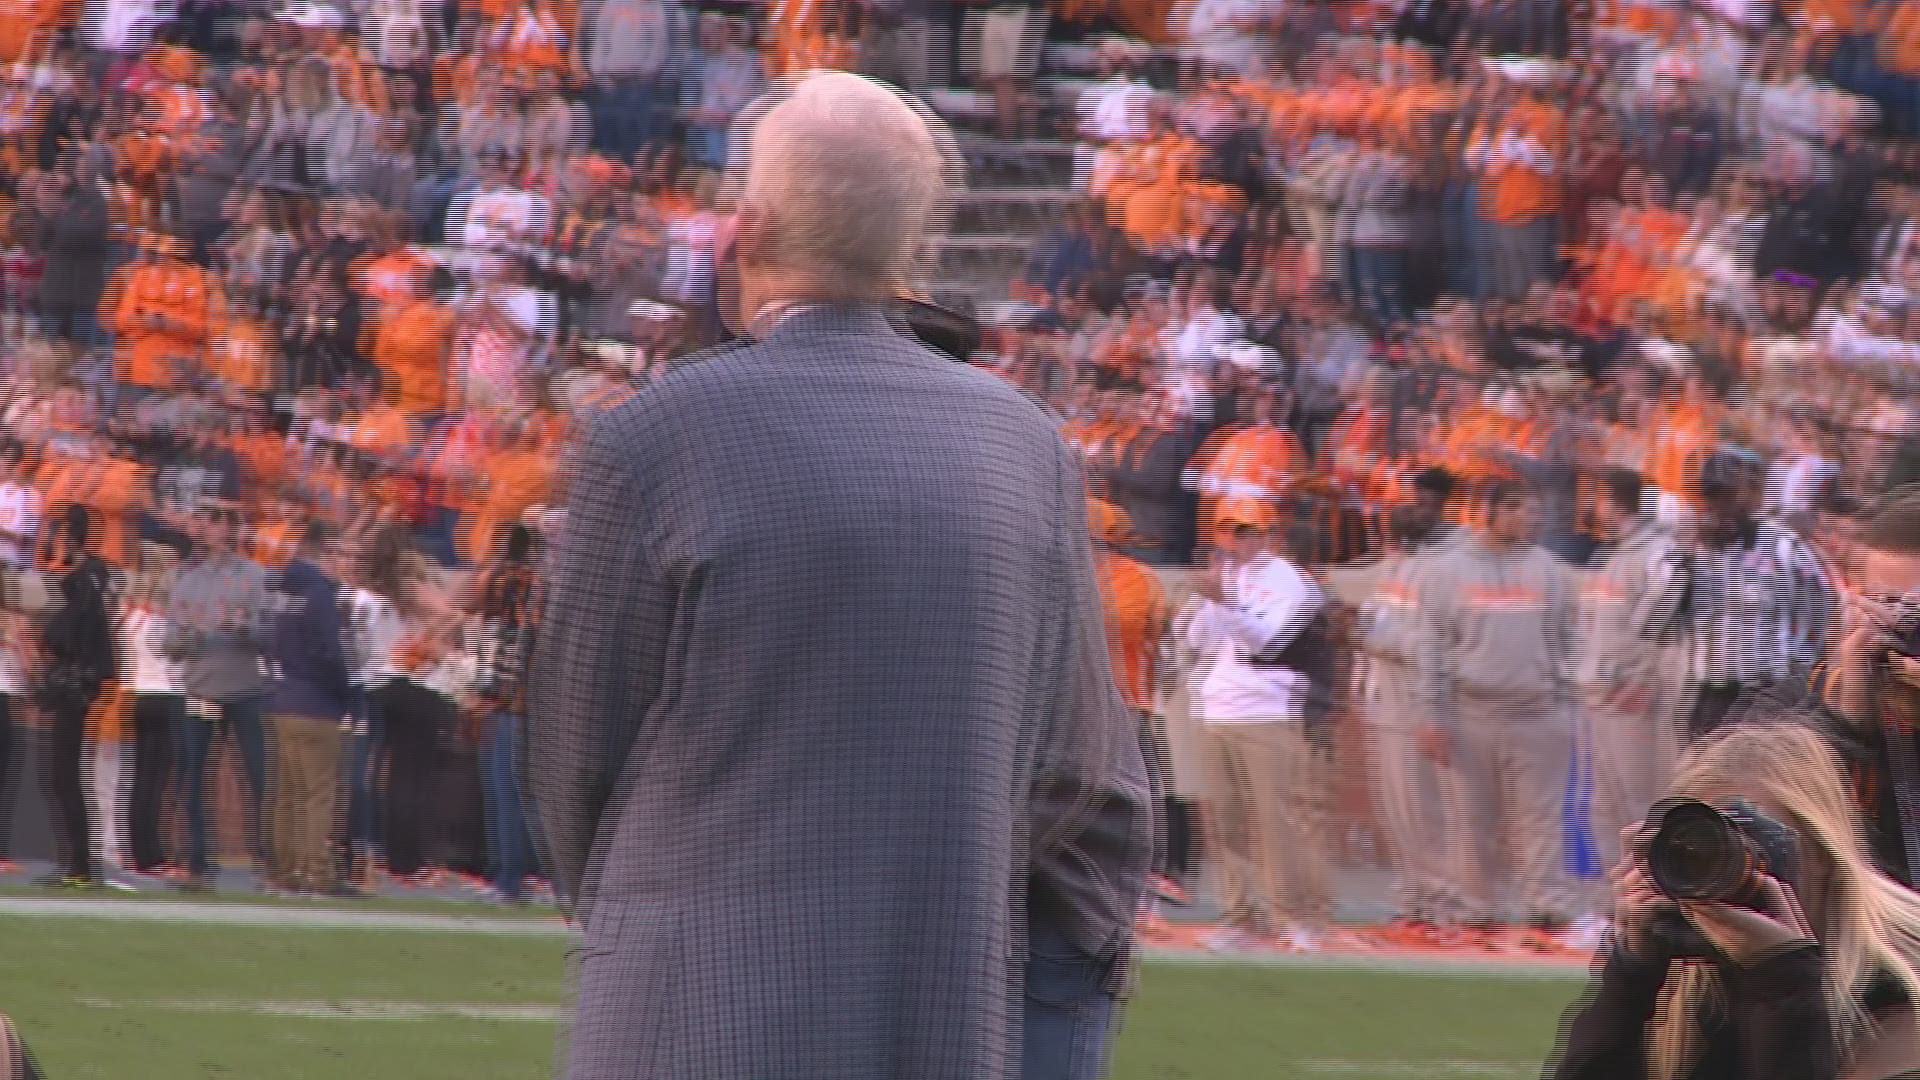 Legendary Tennessee broadcaster John Ward received a standing ovation from the Neyland Stadium crowd as he was honored on the field as the legend of the game during the Vols contest with Vanderbilt.